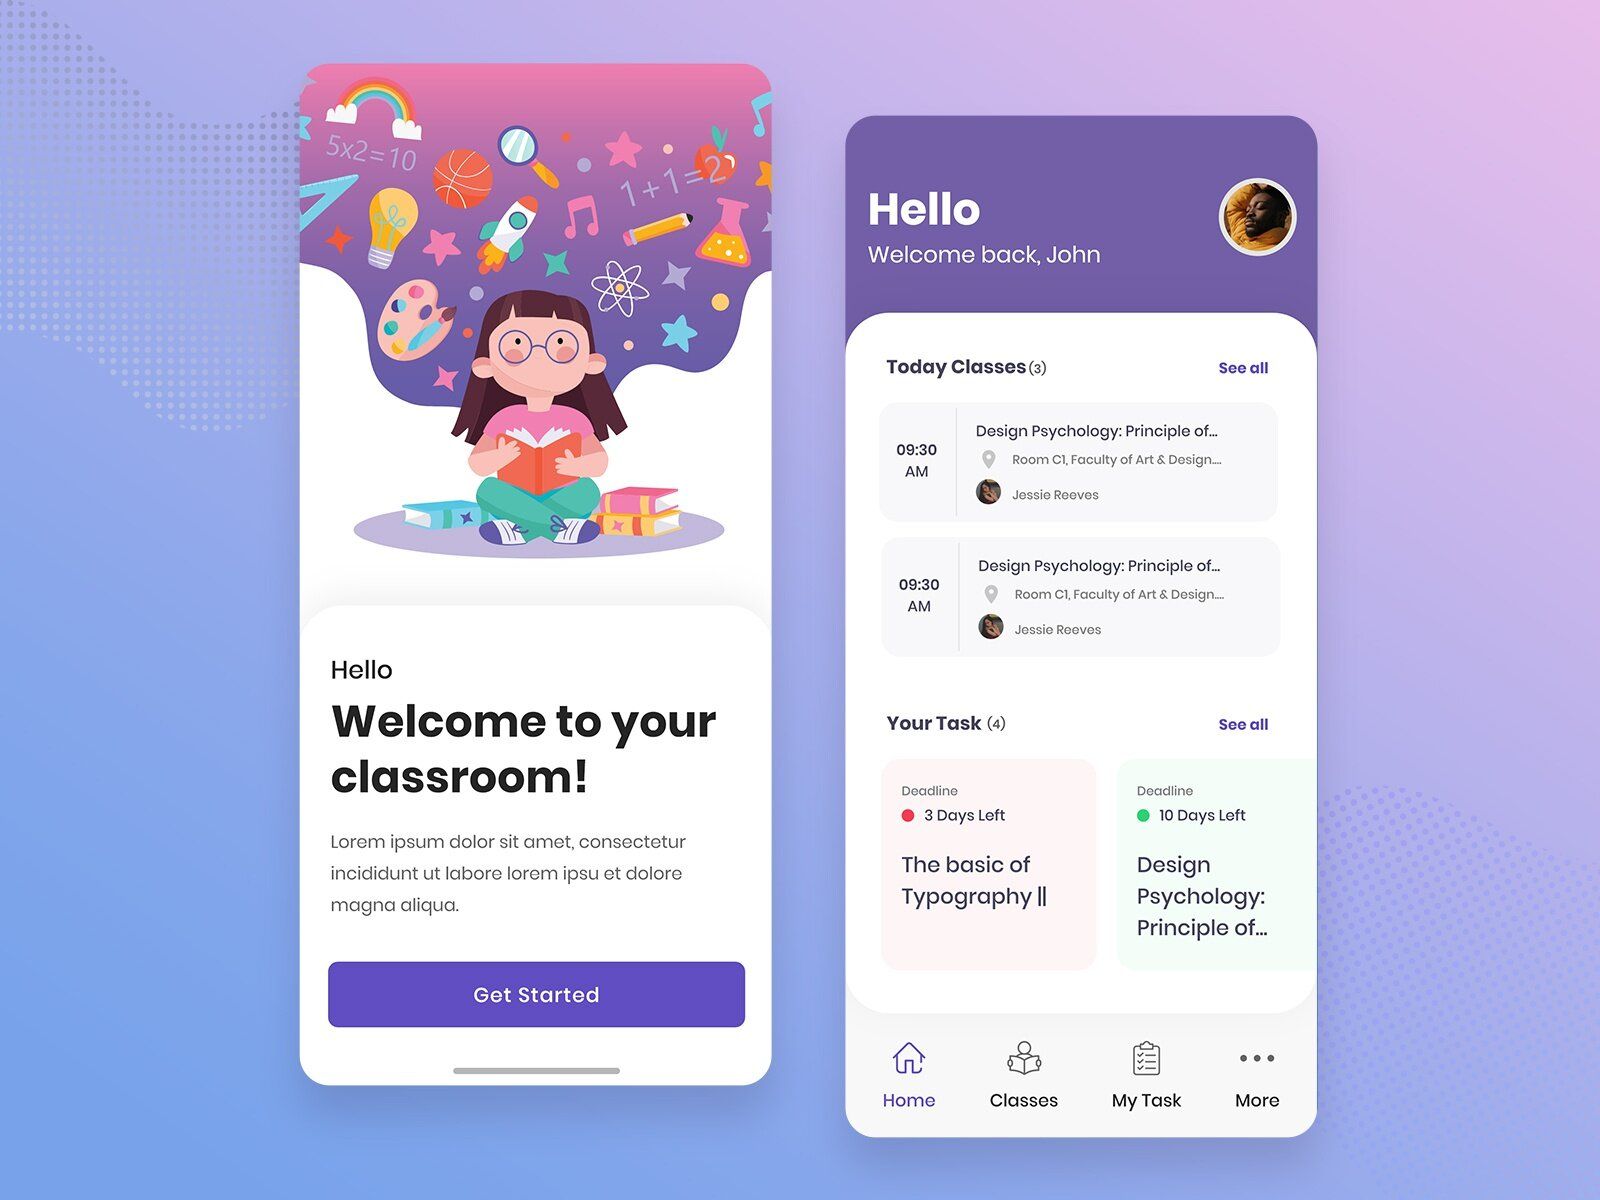 How to make an eLearning platform? Check this guide to find out how to create an education platform! (*image by [aPurple](https://dribbble.com/apurple){ rel="nofollow" .default-md}*)